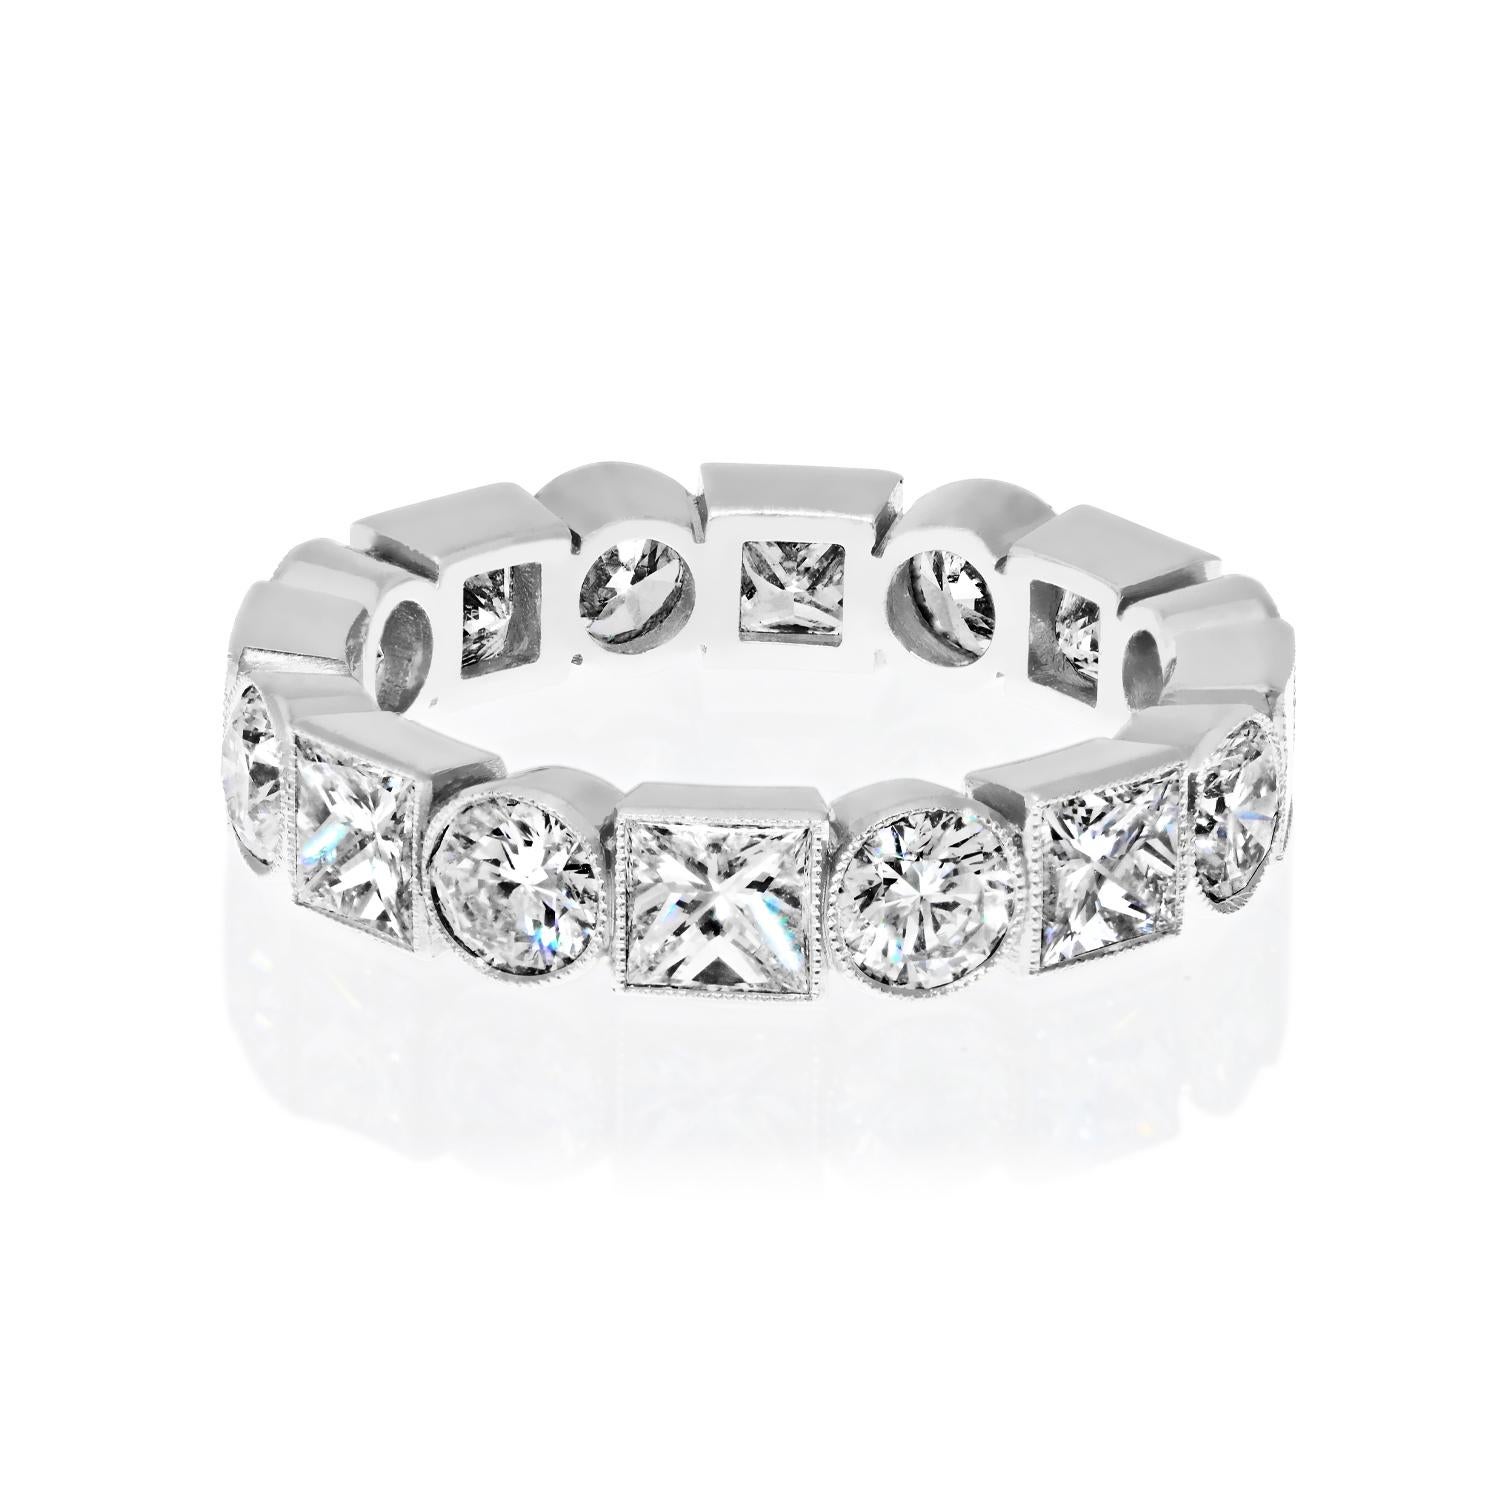 This platinum diamond eternity band is an exquisite piece of jewelry that will captivate anyone's attention. The alternating pattern of princess and round cut diamonds gives the ring a unique and sophisticated look.

All of the diamonds are bezel